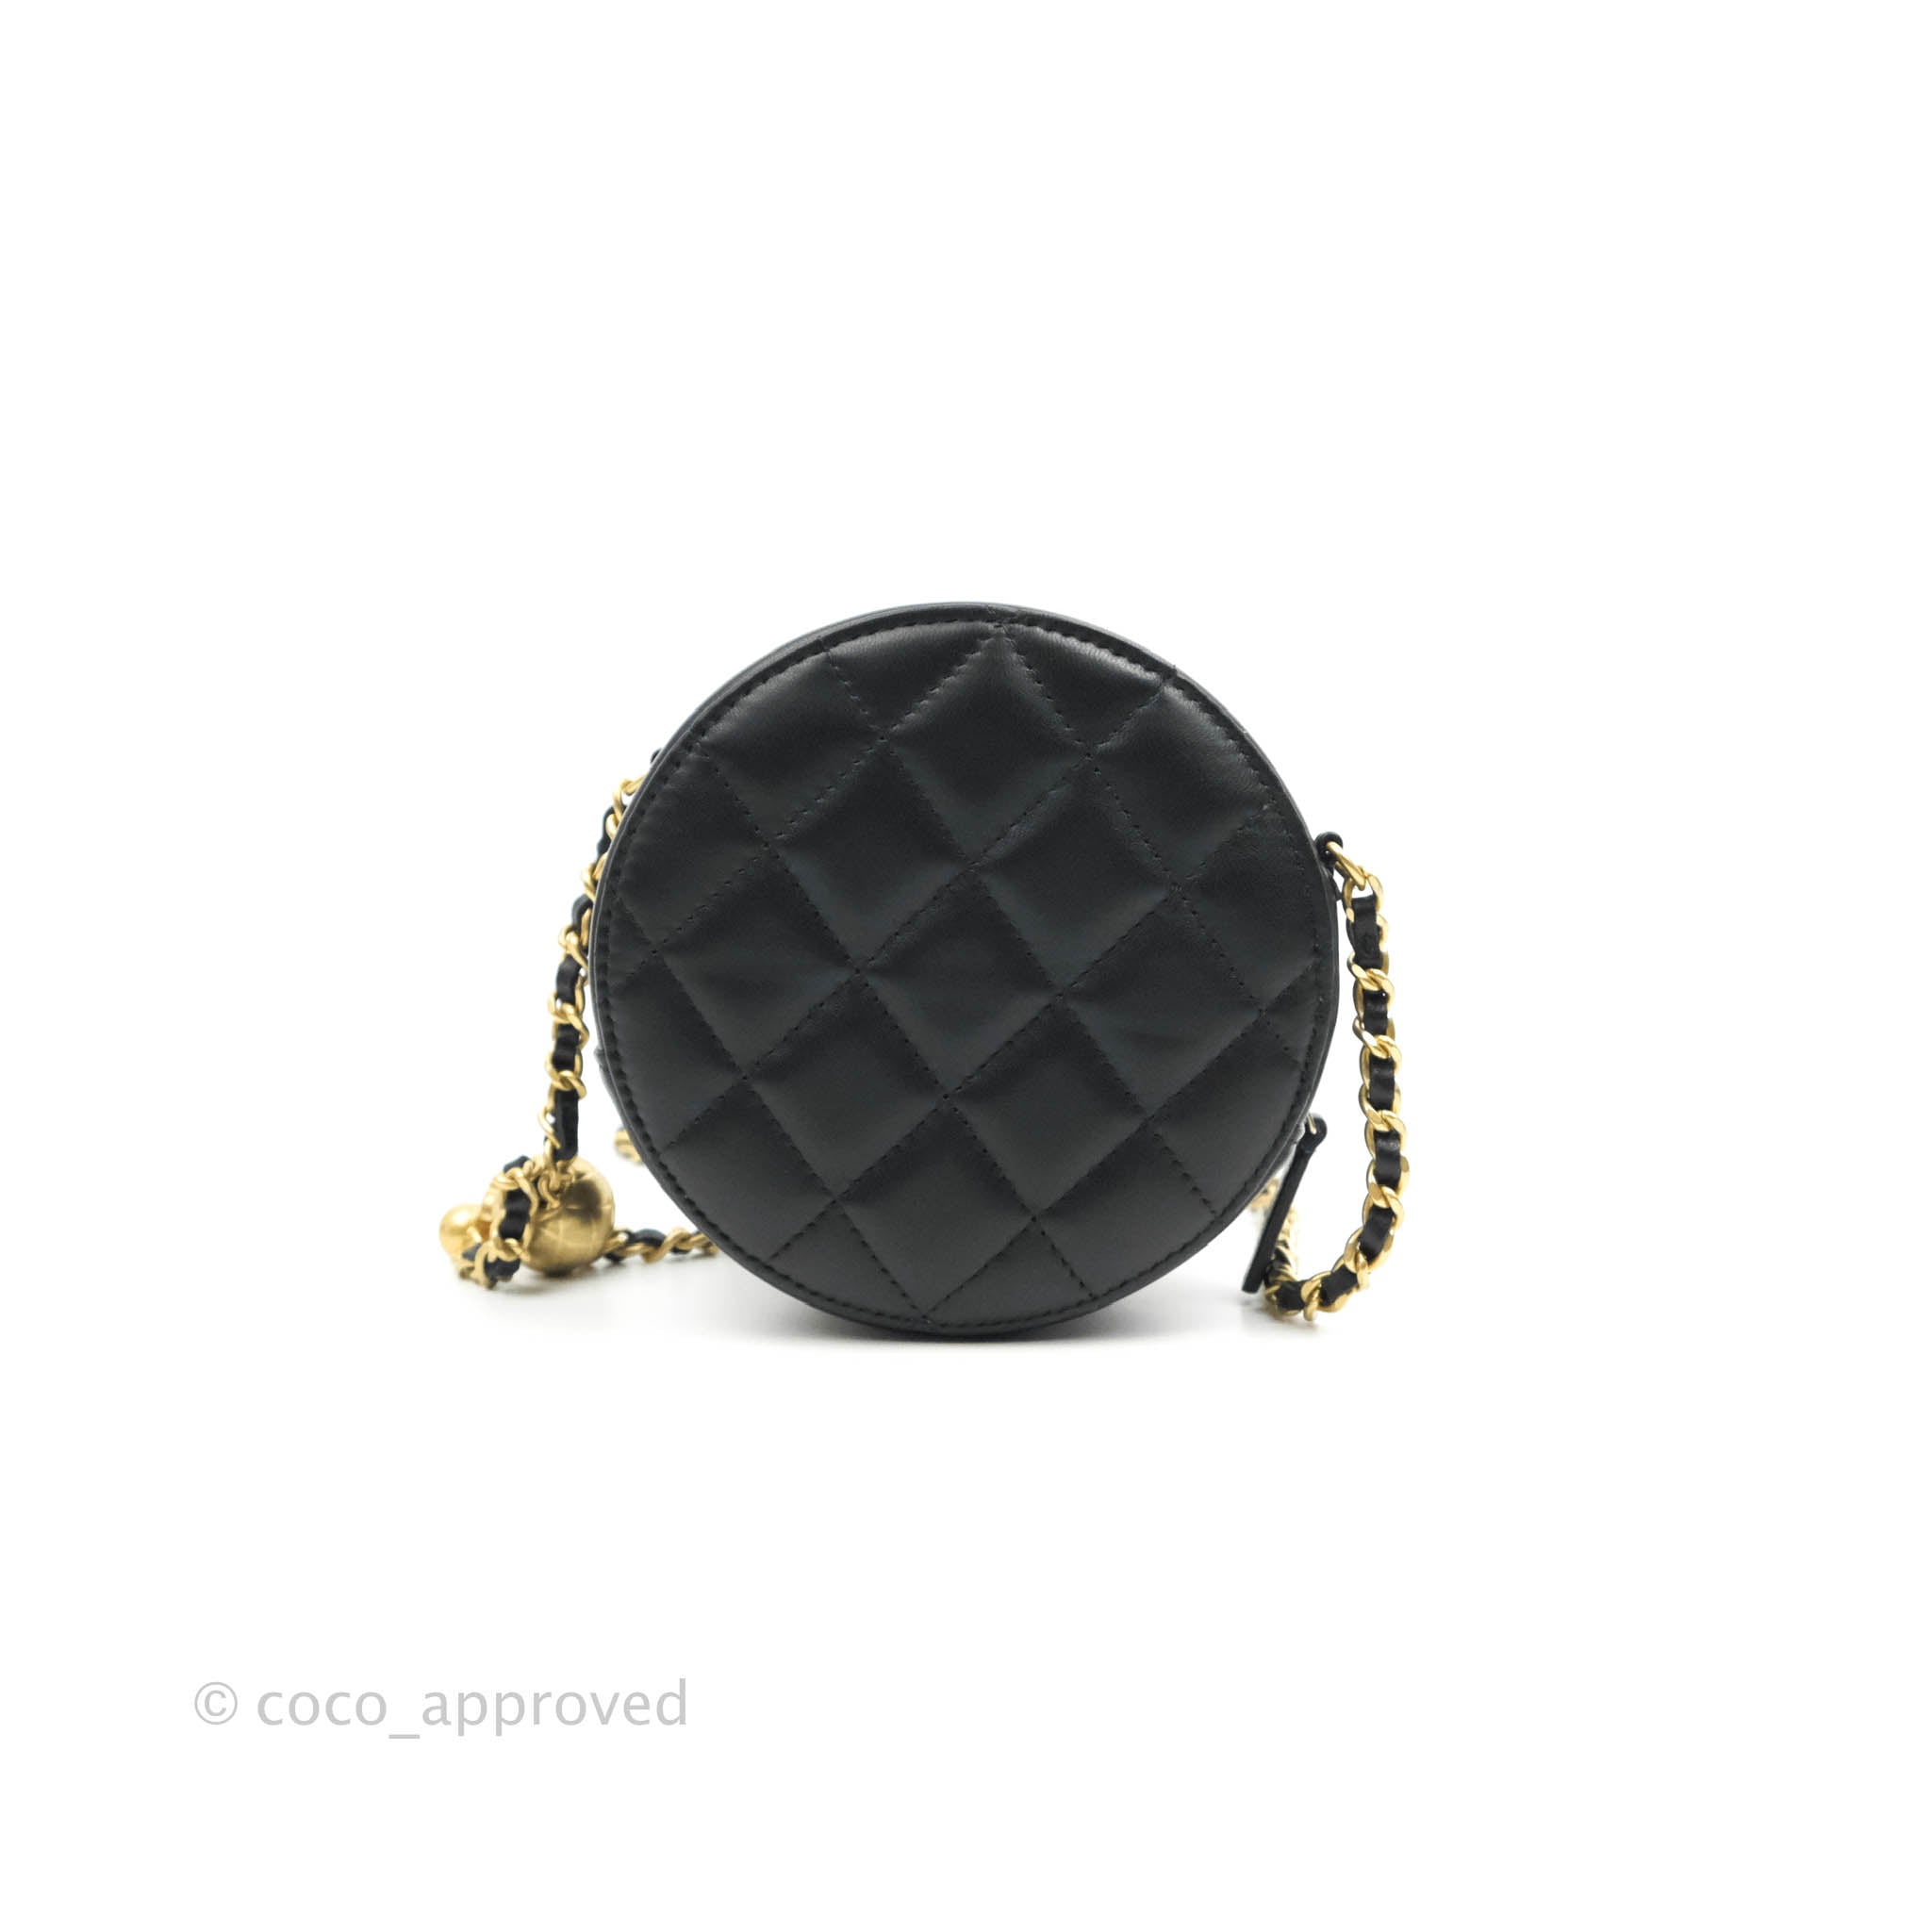 Chanel Black Satin Clutch Bag with Pearl Tassel . Very Good to, Lot #58225